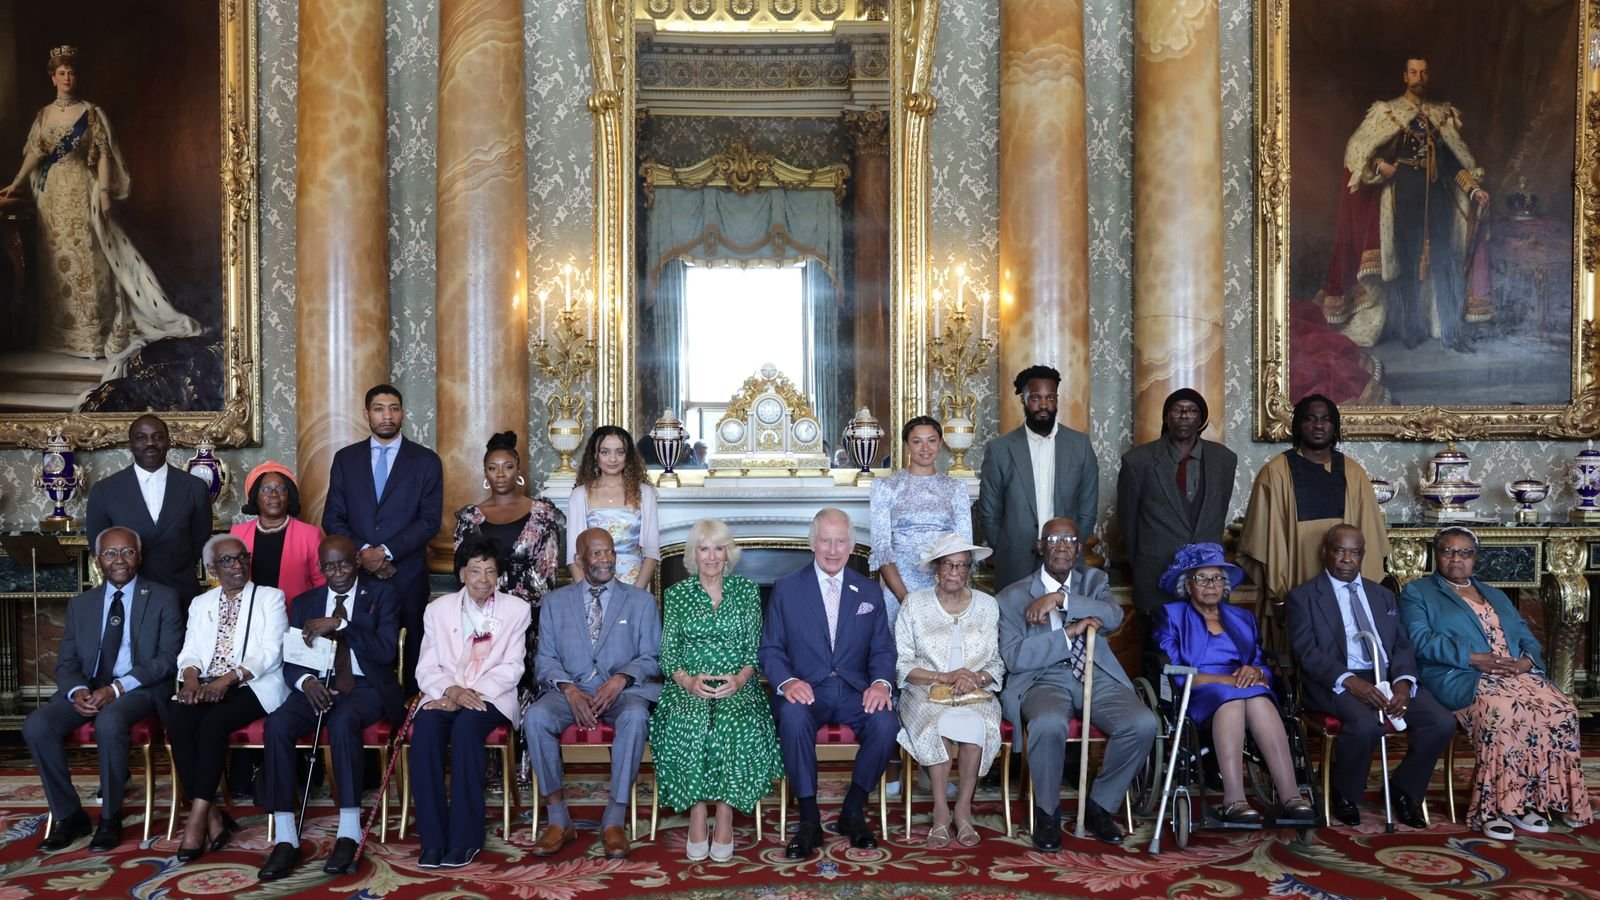 'Remarkable legacy' - King honours Windrush generation with portraits that 'enrich fabric of national life'